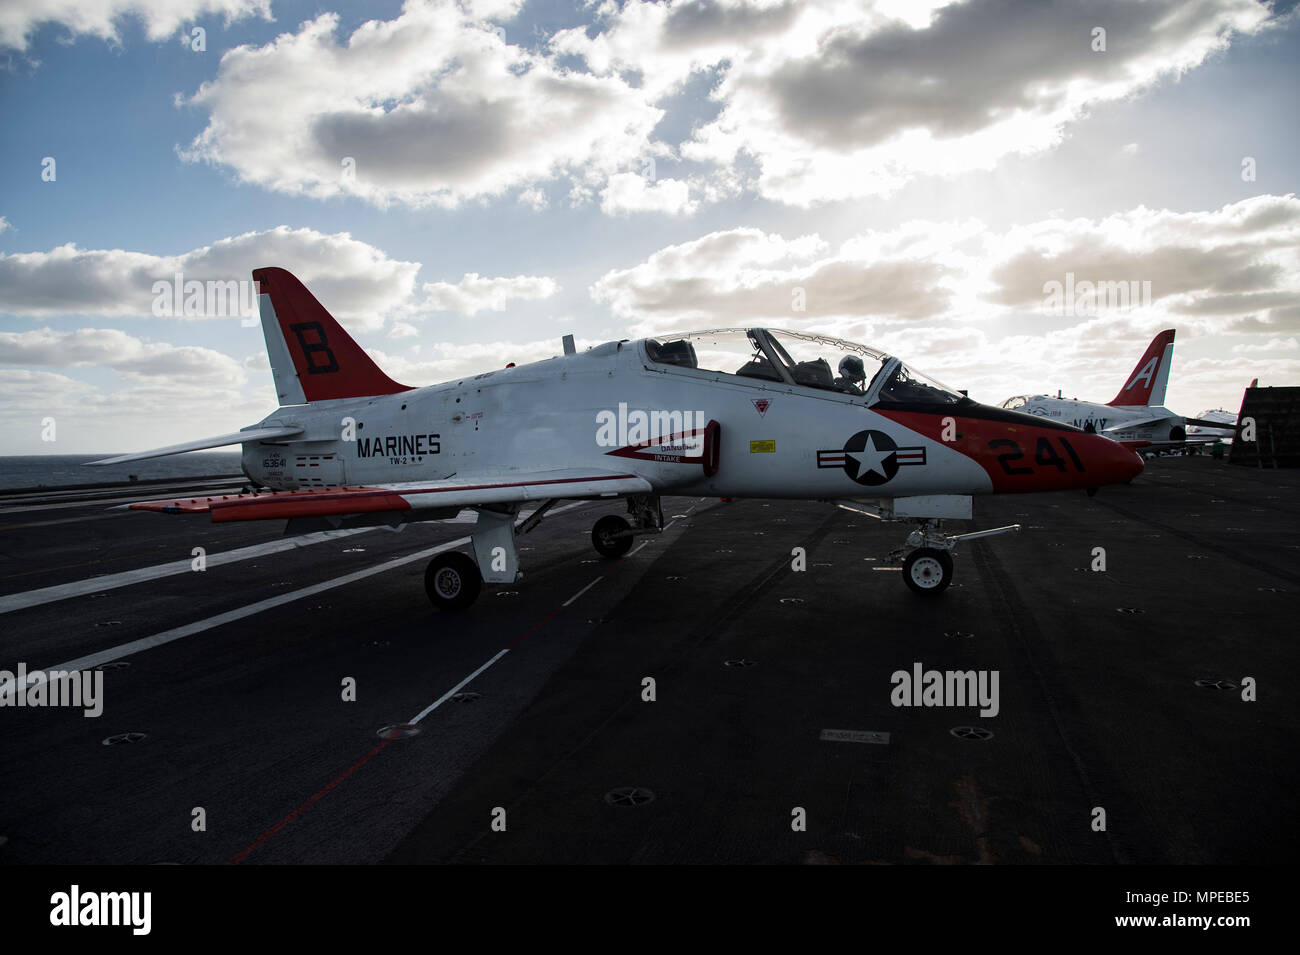 170211-N-OS569-010  ATLANTIC OCEAN (Feb. 11, 2017) A T-45C Goshawk assigned to Carrier Training Wing (CTW) 2 taxis across the flight deck of the aircraft carrier USS Dwight D. Eisenhower (CVN 69) (Ike). Ike is currently conducting aircraft carrier qualifications during the sustainment phase of the Optimized Fleet Response Plan (OFRP). (U.S. Navy photo by Mass Communication Specialist Seaman Zach Sleeper) Stock Photo